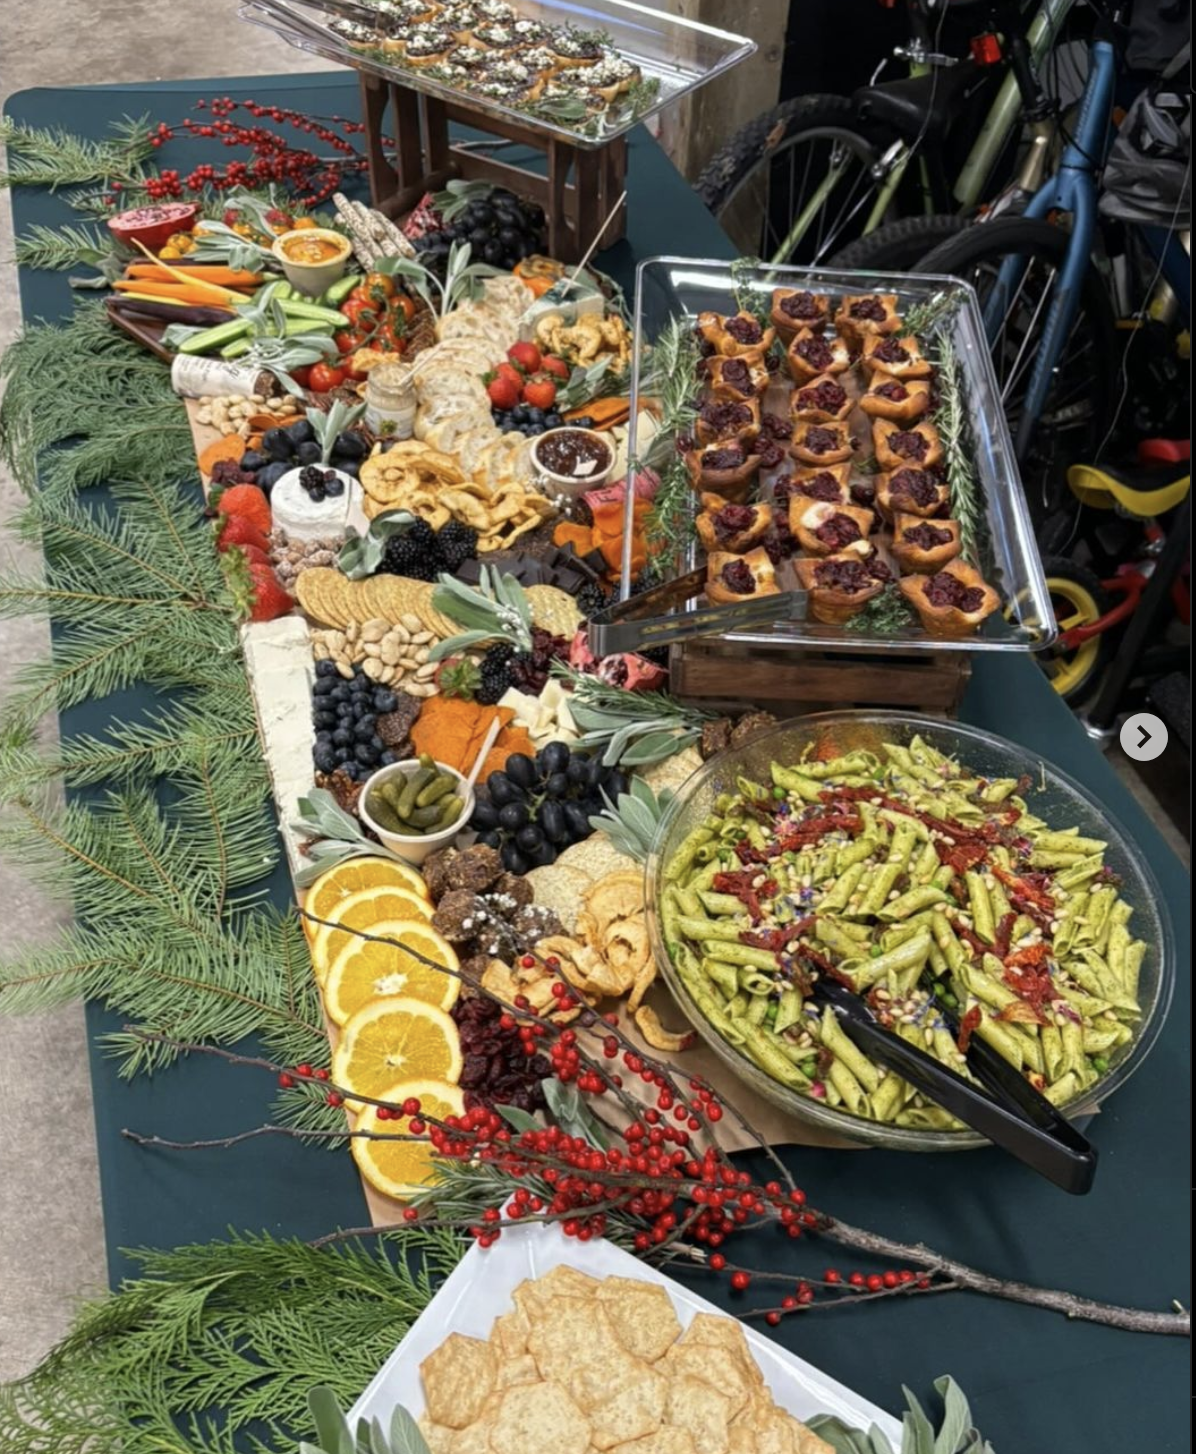 The Hungry Herbivore catering spread